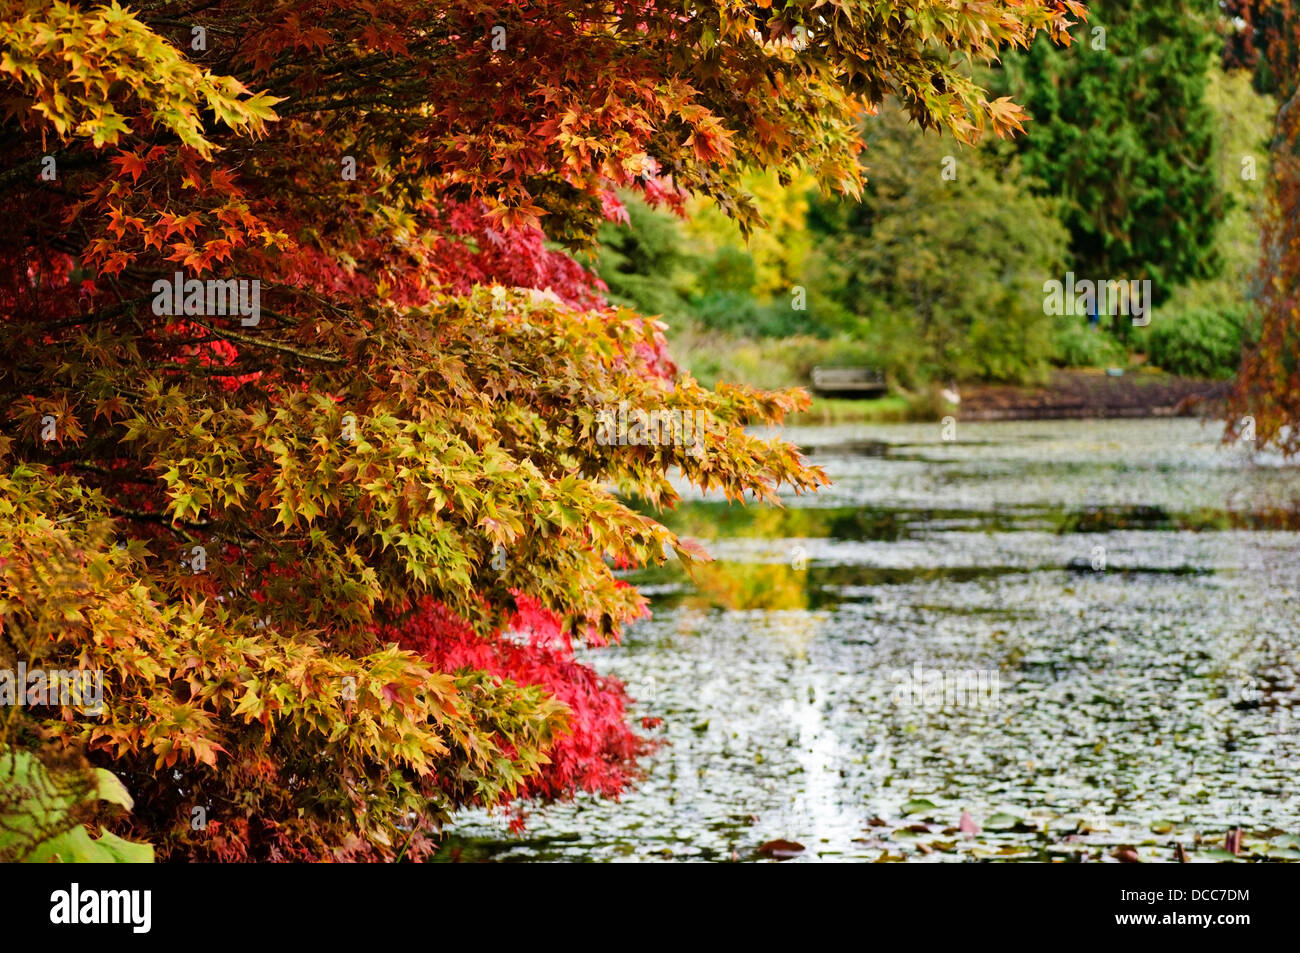 colourful-autumn-leaves-and-trees-by-a-p